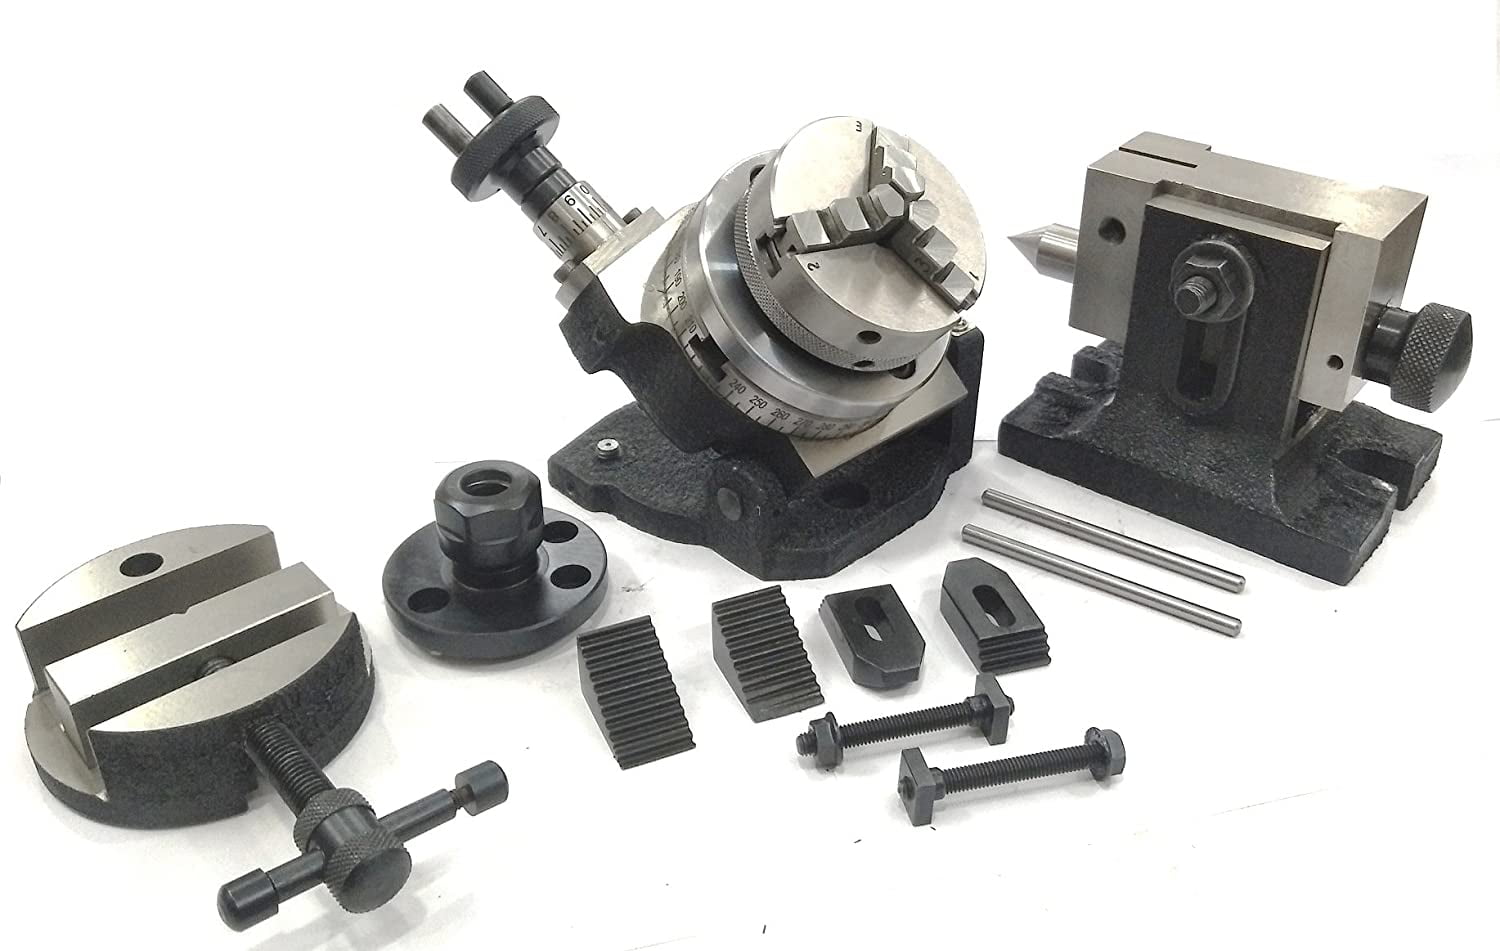 ROTARY TABLE 3" 75 MM WITH SINGLE BOLT TAILSTOCK & M6 CLAMPING KIT SET 